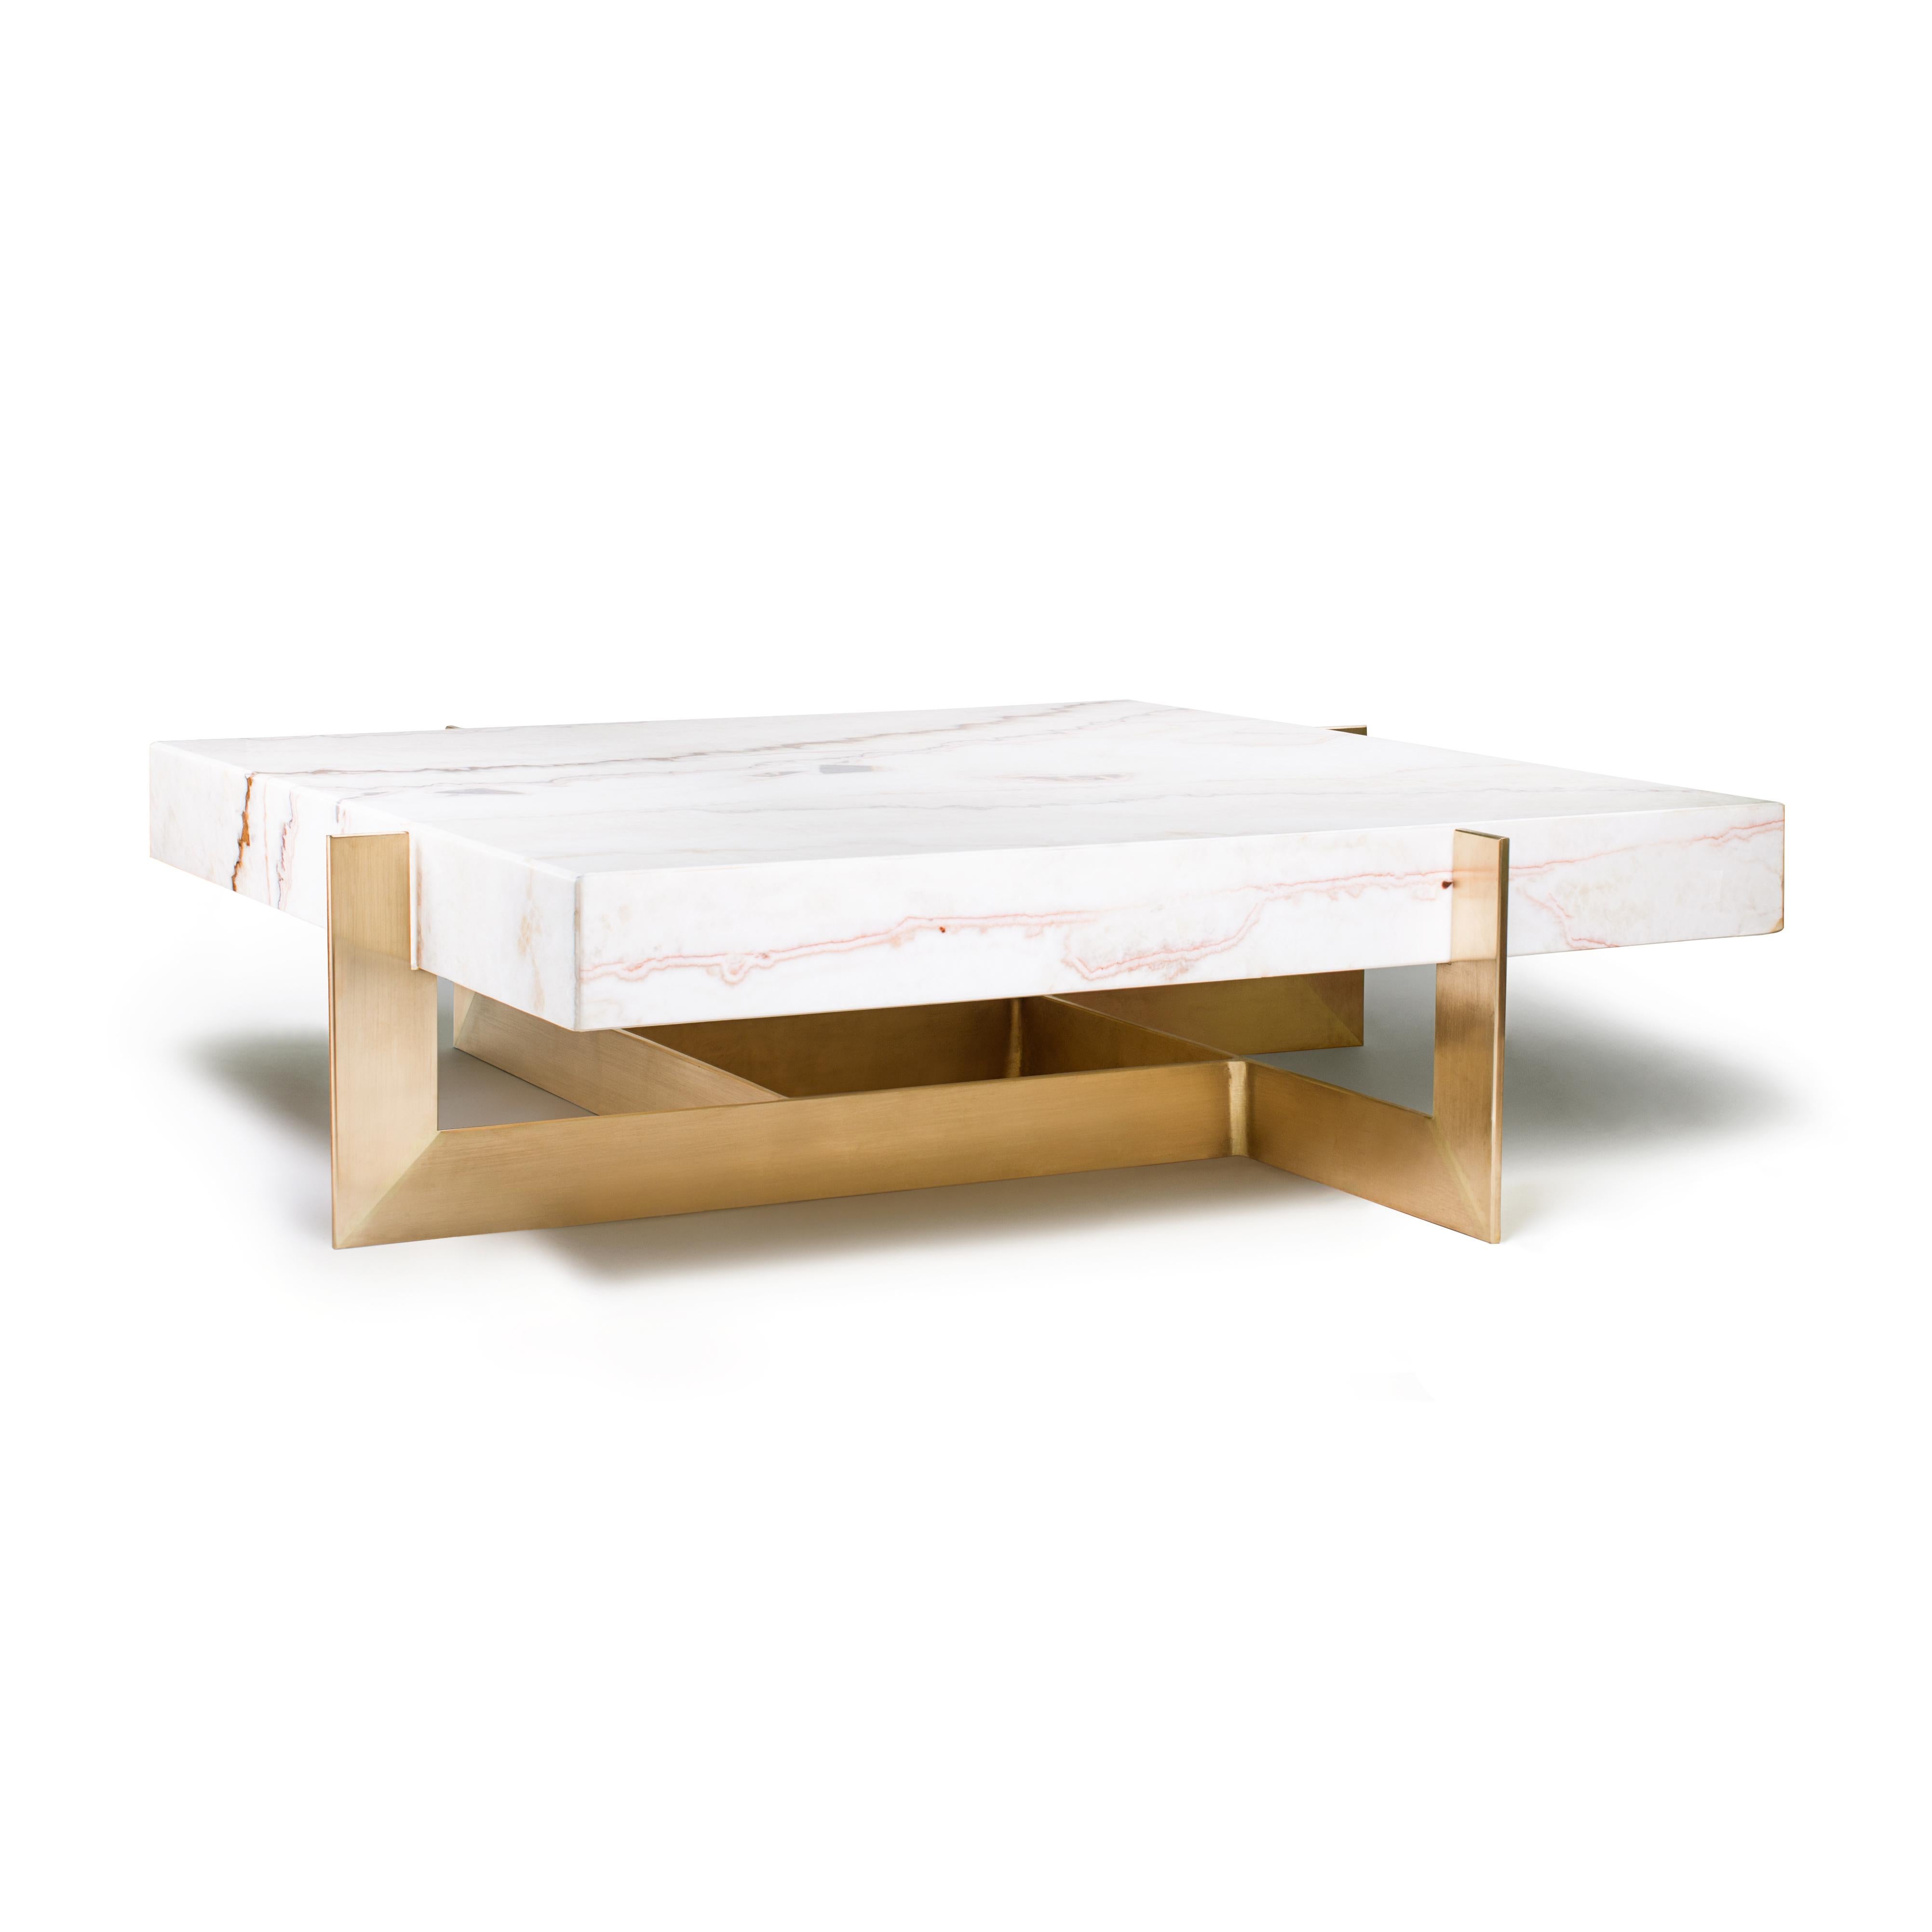 The golden rock I coffee table, limited edition by Grzegorz Majka
Edition 1 of 8
Dimensions: 39.37 x 39.37 x 11.81 in
Materials: onyx and solid brass

When one hears the term, “Golden Rock”, it’s hard not to envisage scenes of regal beauty. A